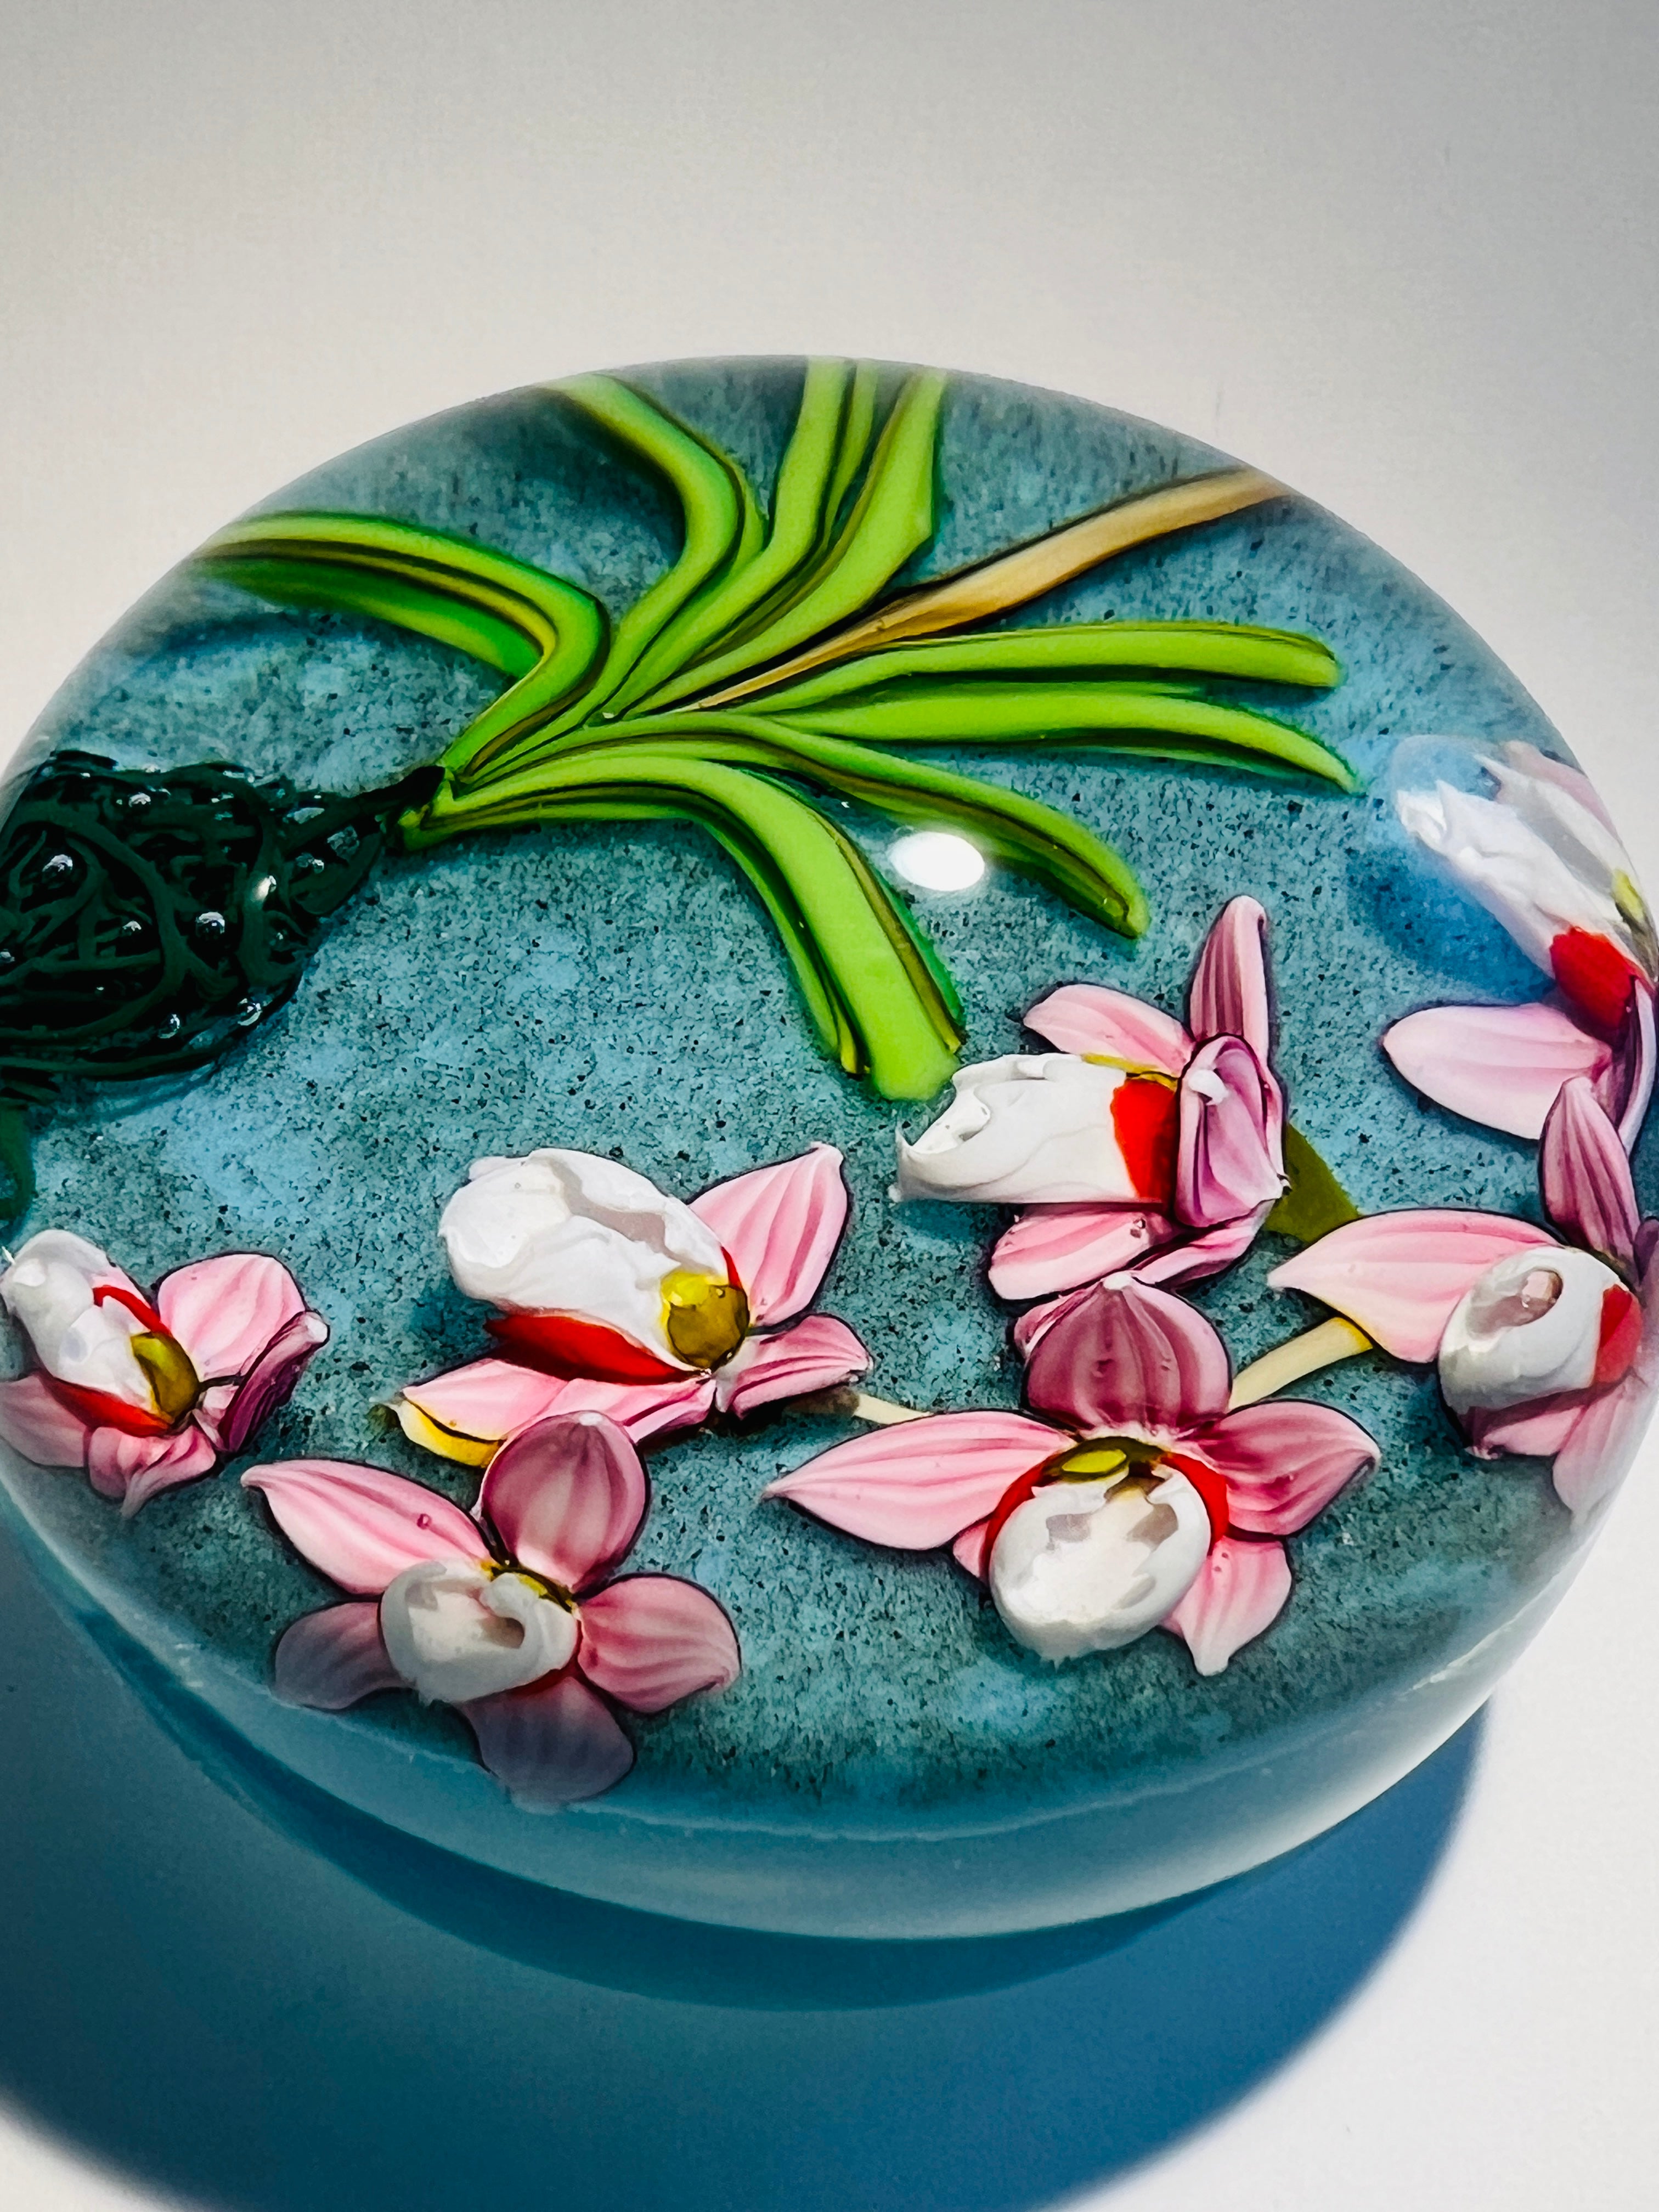 Mikael Hingant orchid paperweight